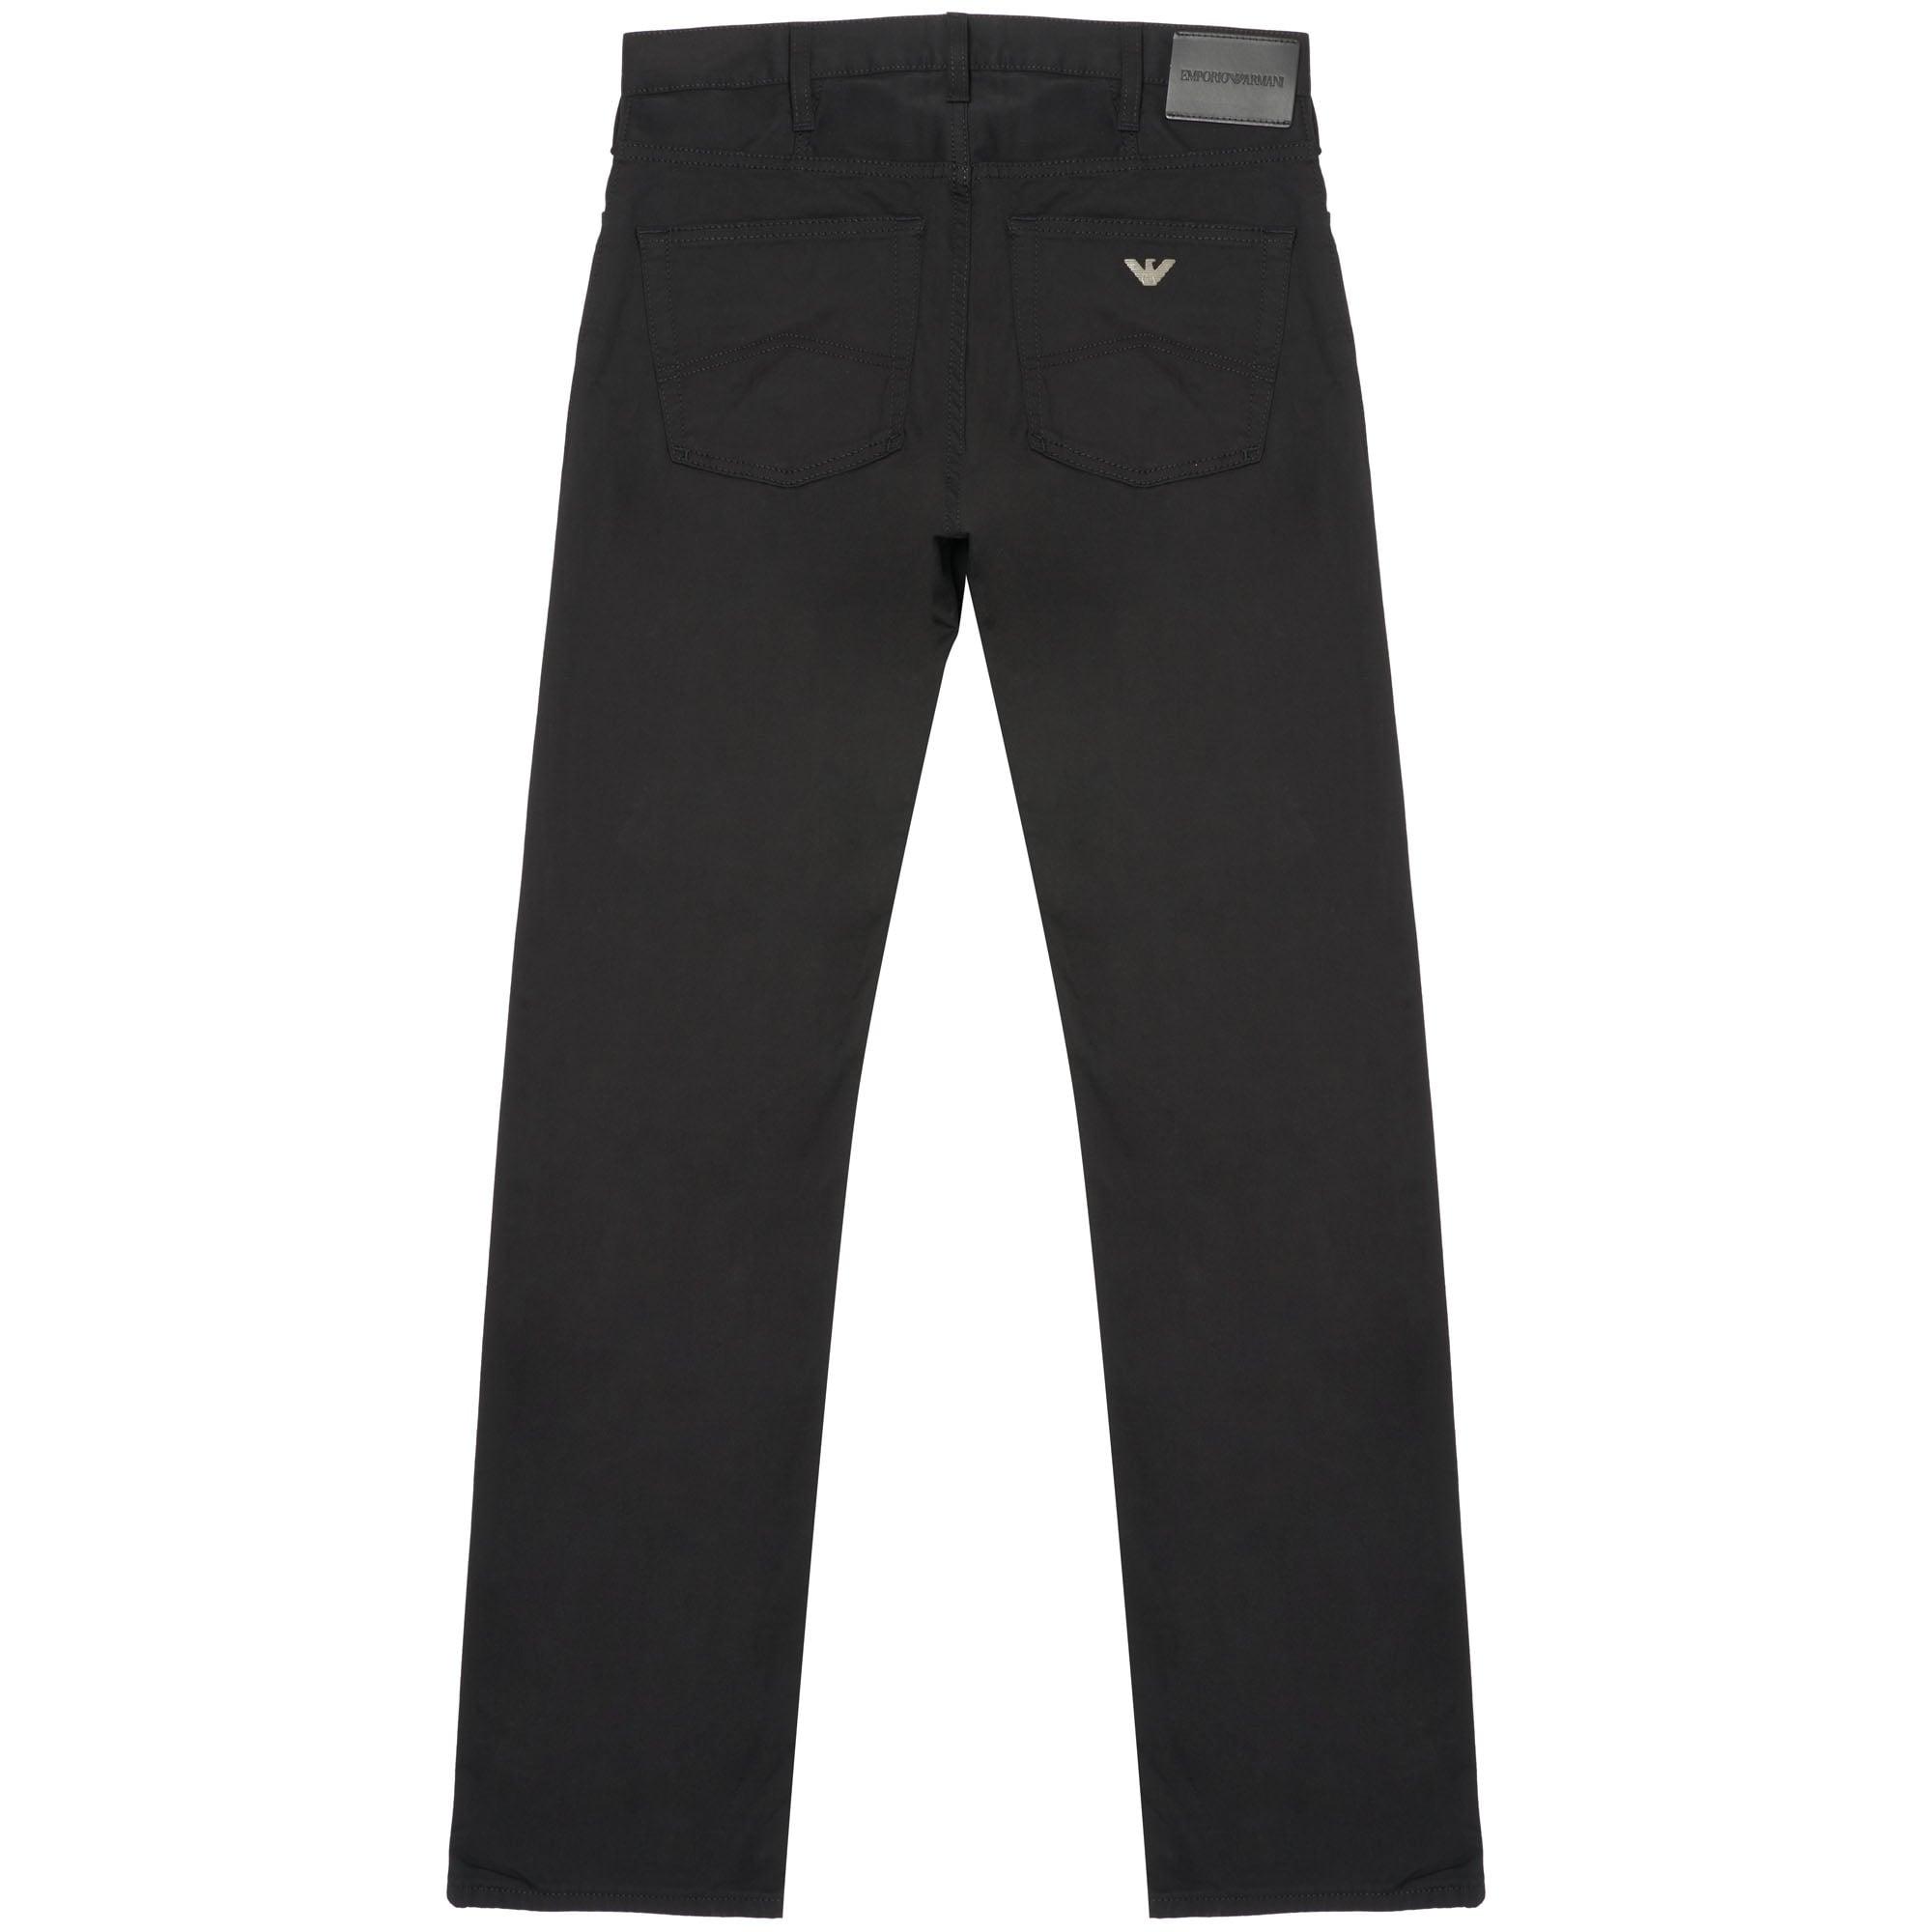 Emporio Armani Denim J21 Jeans Style Chinos in Black for Men - Save 57% -  Lyst